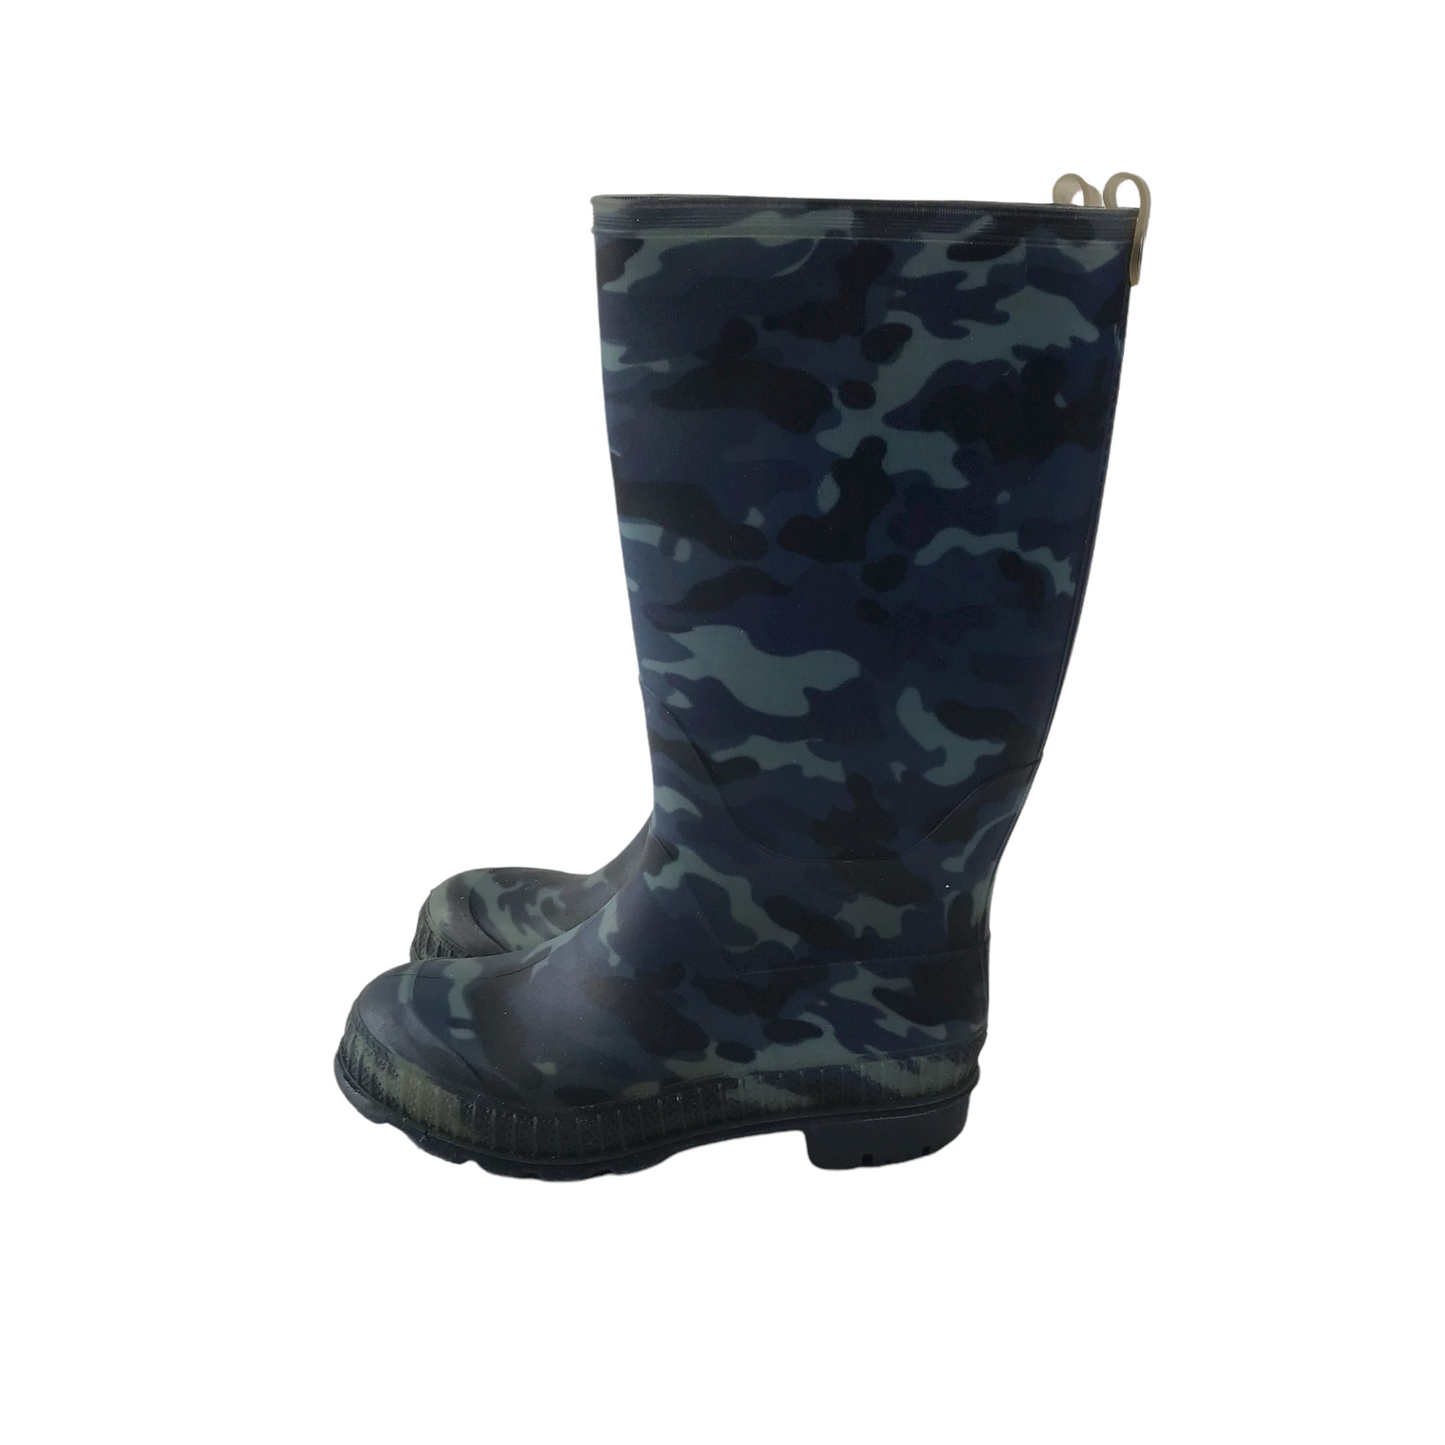 F&F Blue and Navy Camo Wellies Shoe Size 11 (jr)